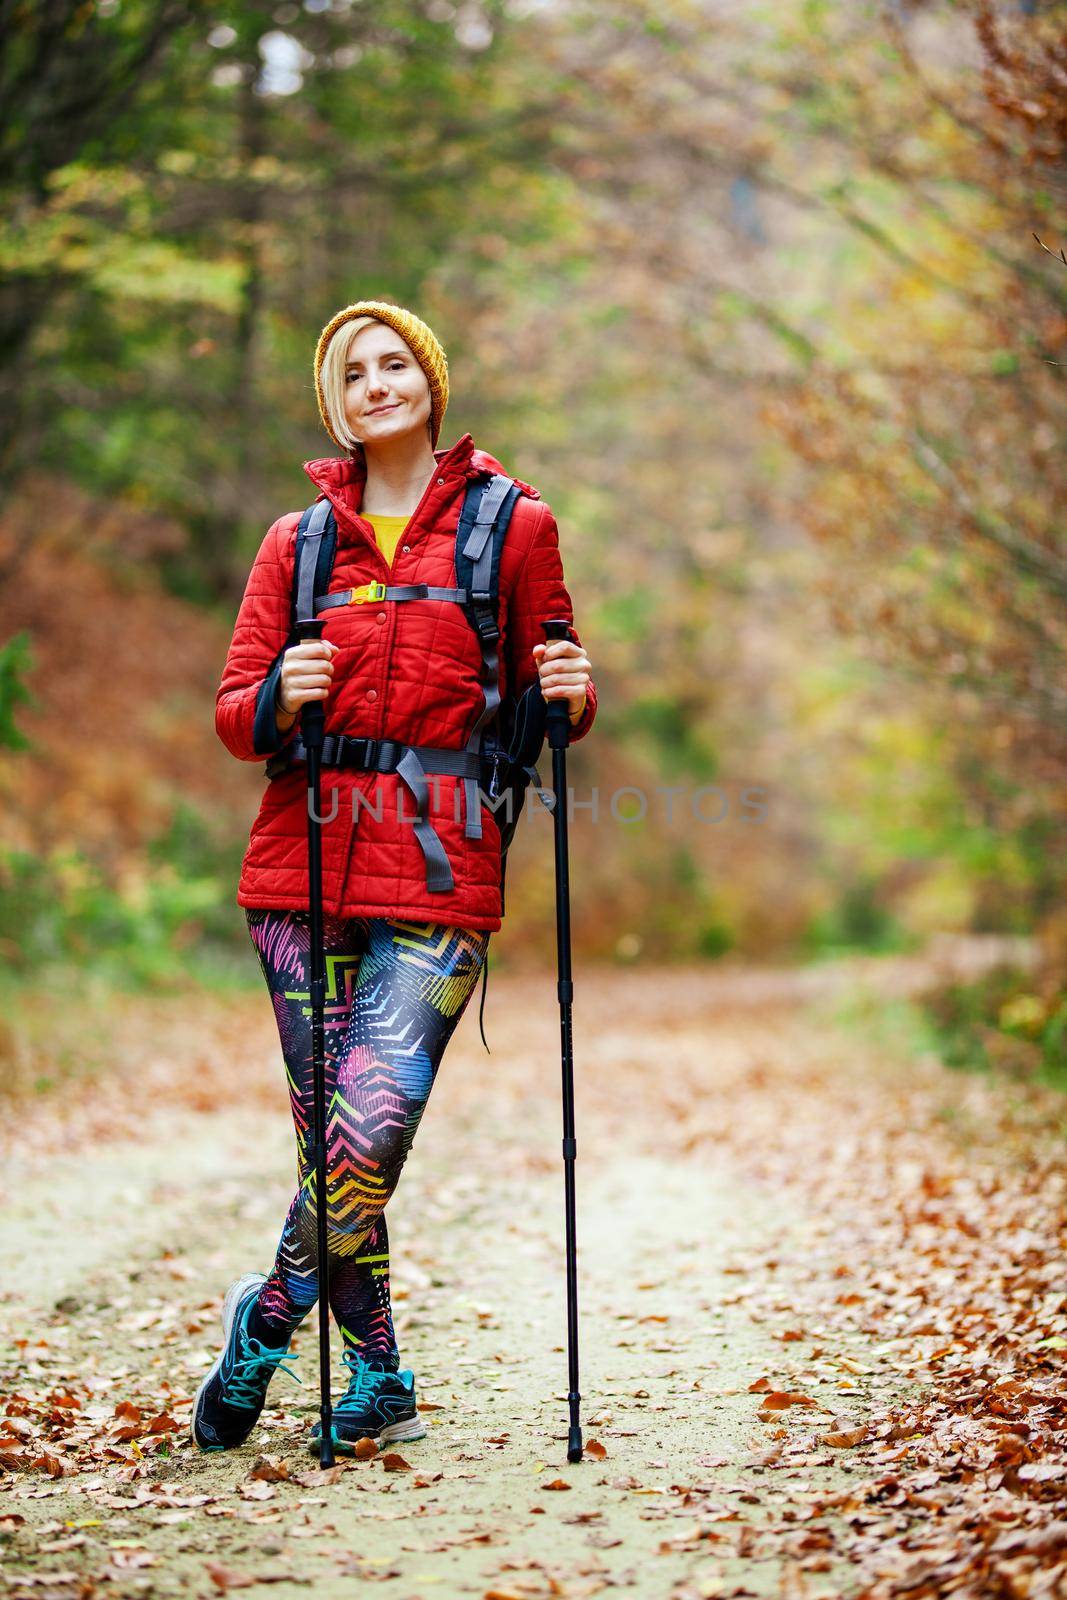 Hiking girl with poles and backpack on a trail. Looking at camera. Travel and healthy lifestyle outdoors in fall season by kokimk